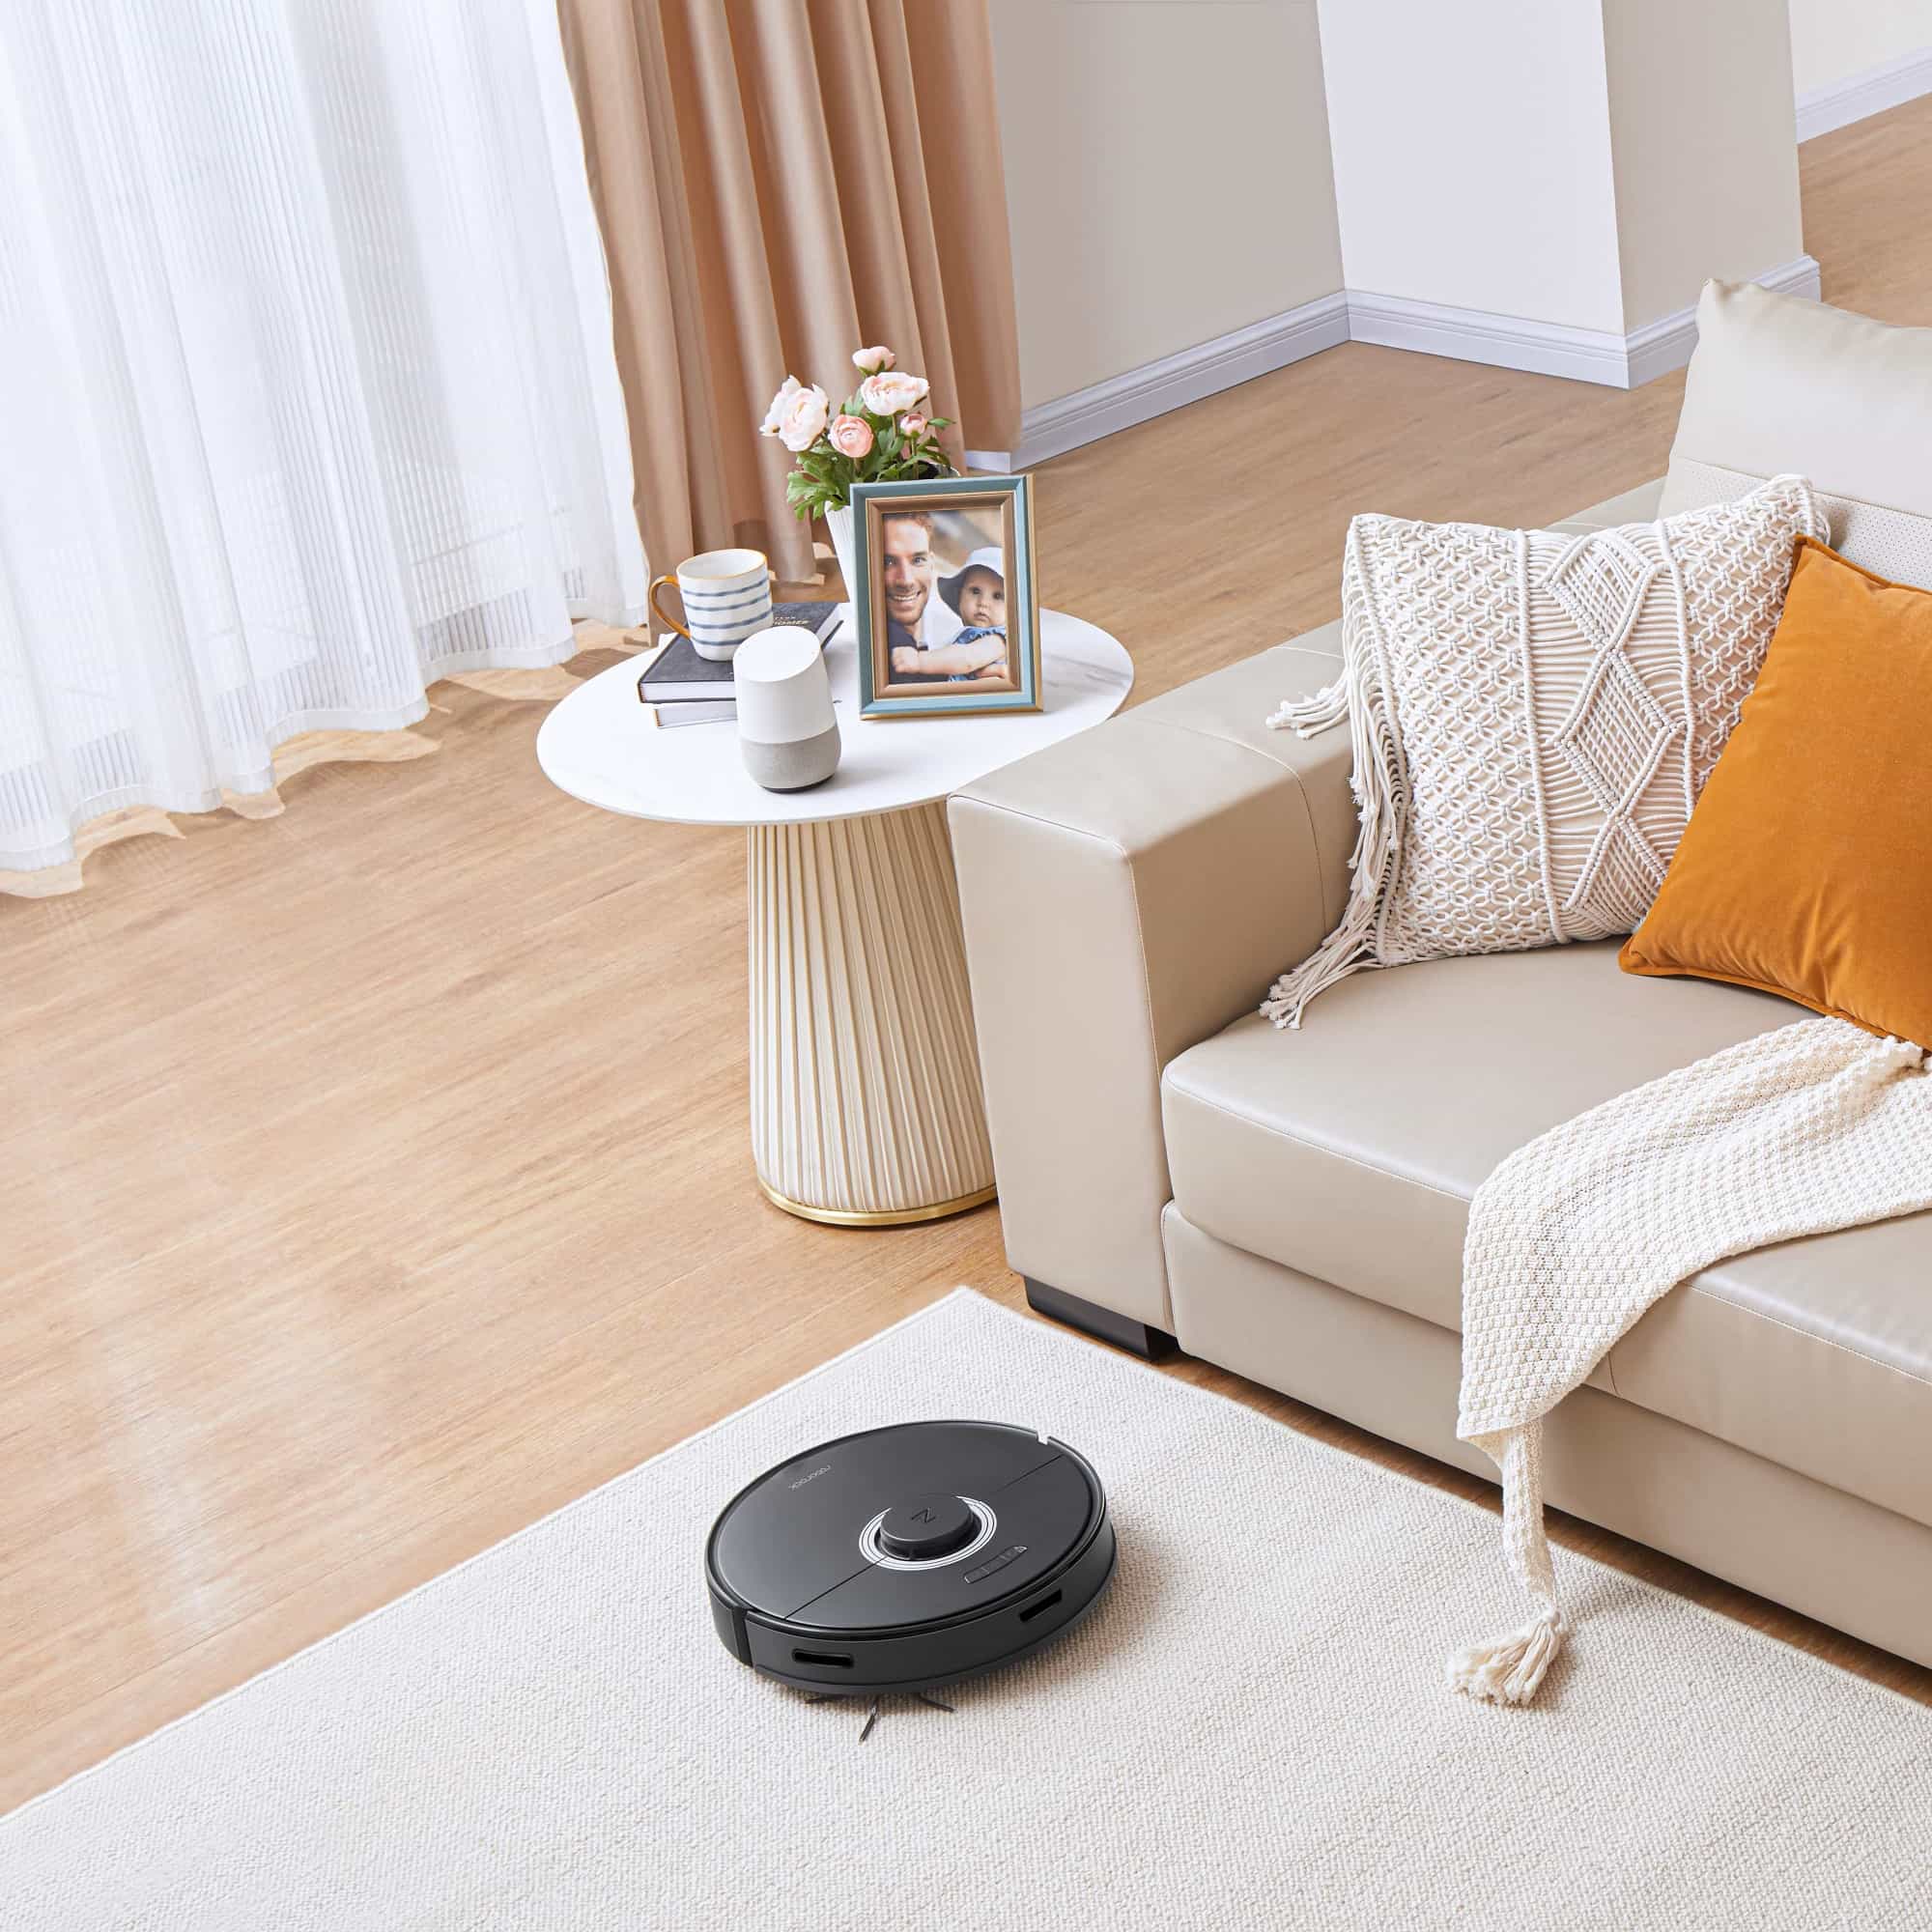 Make the Switch to a Robot Vacuum With $174 Off the Roborock Q7